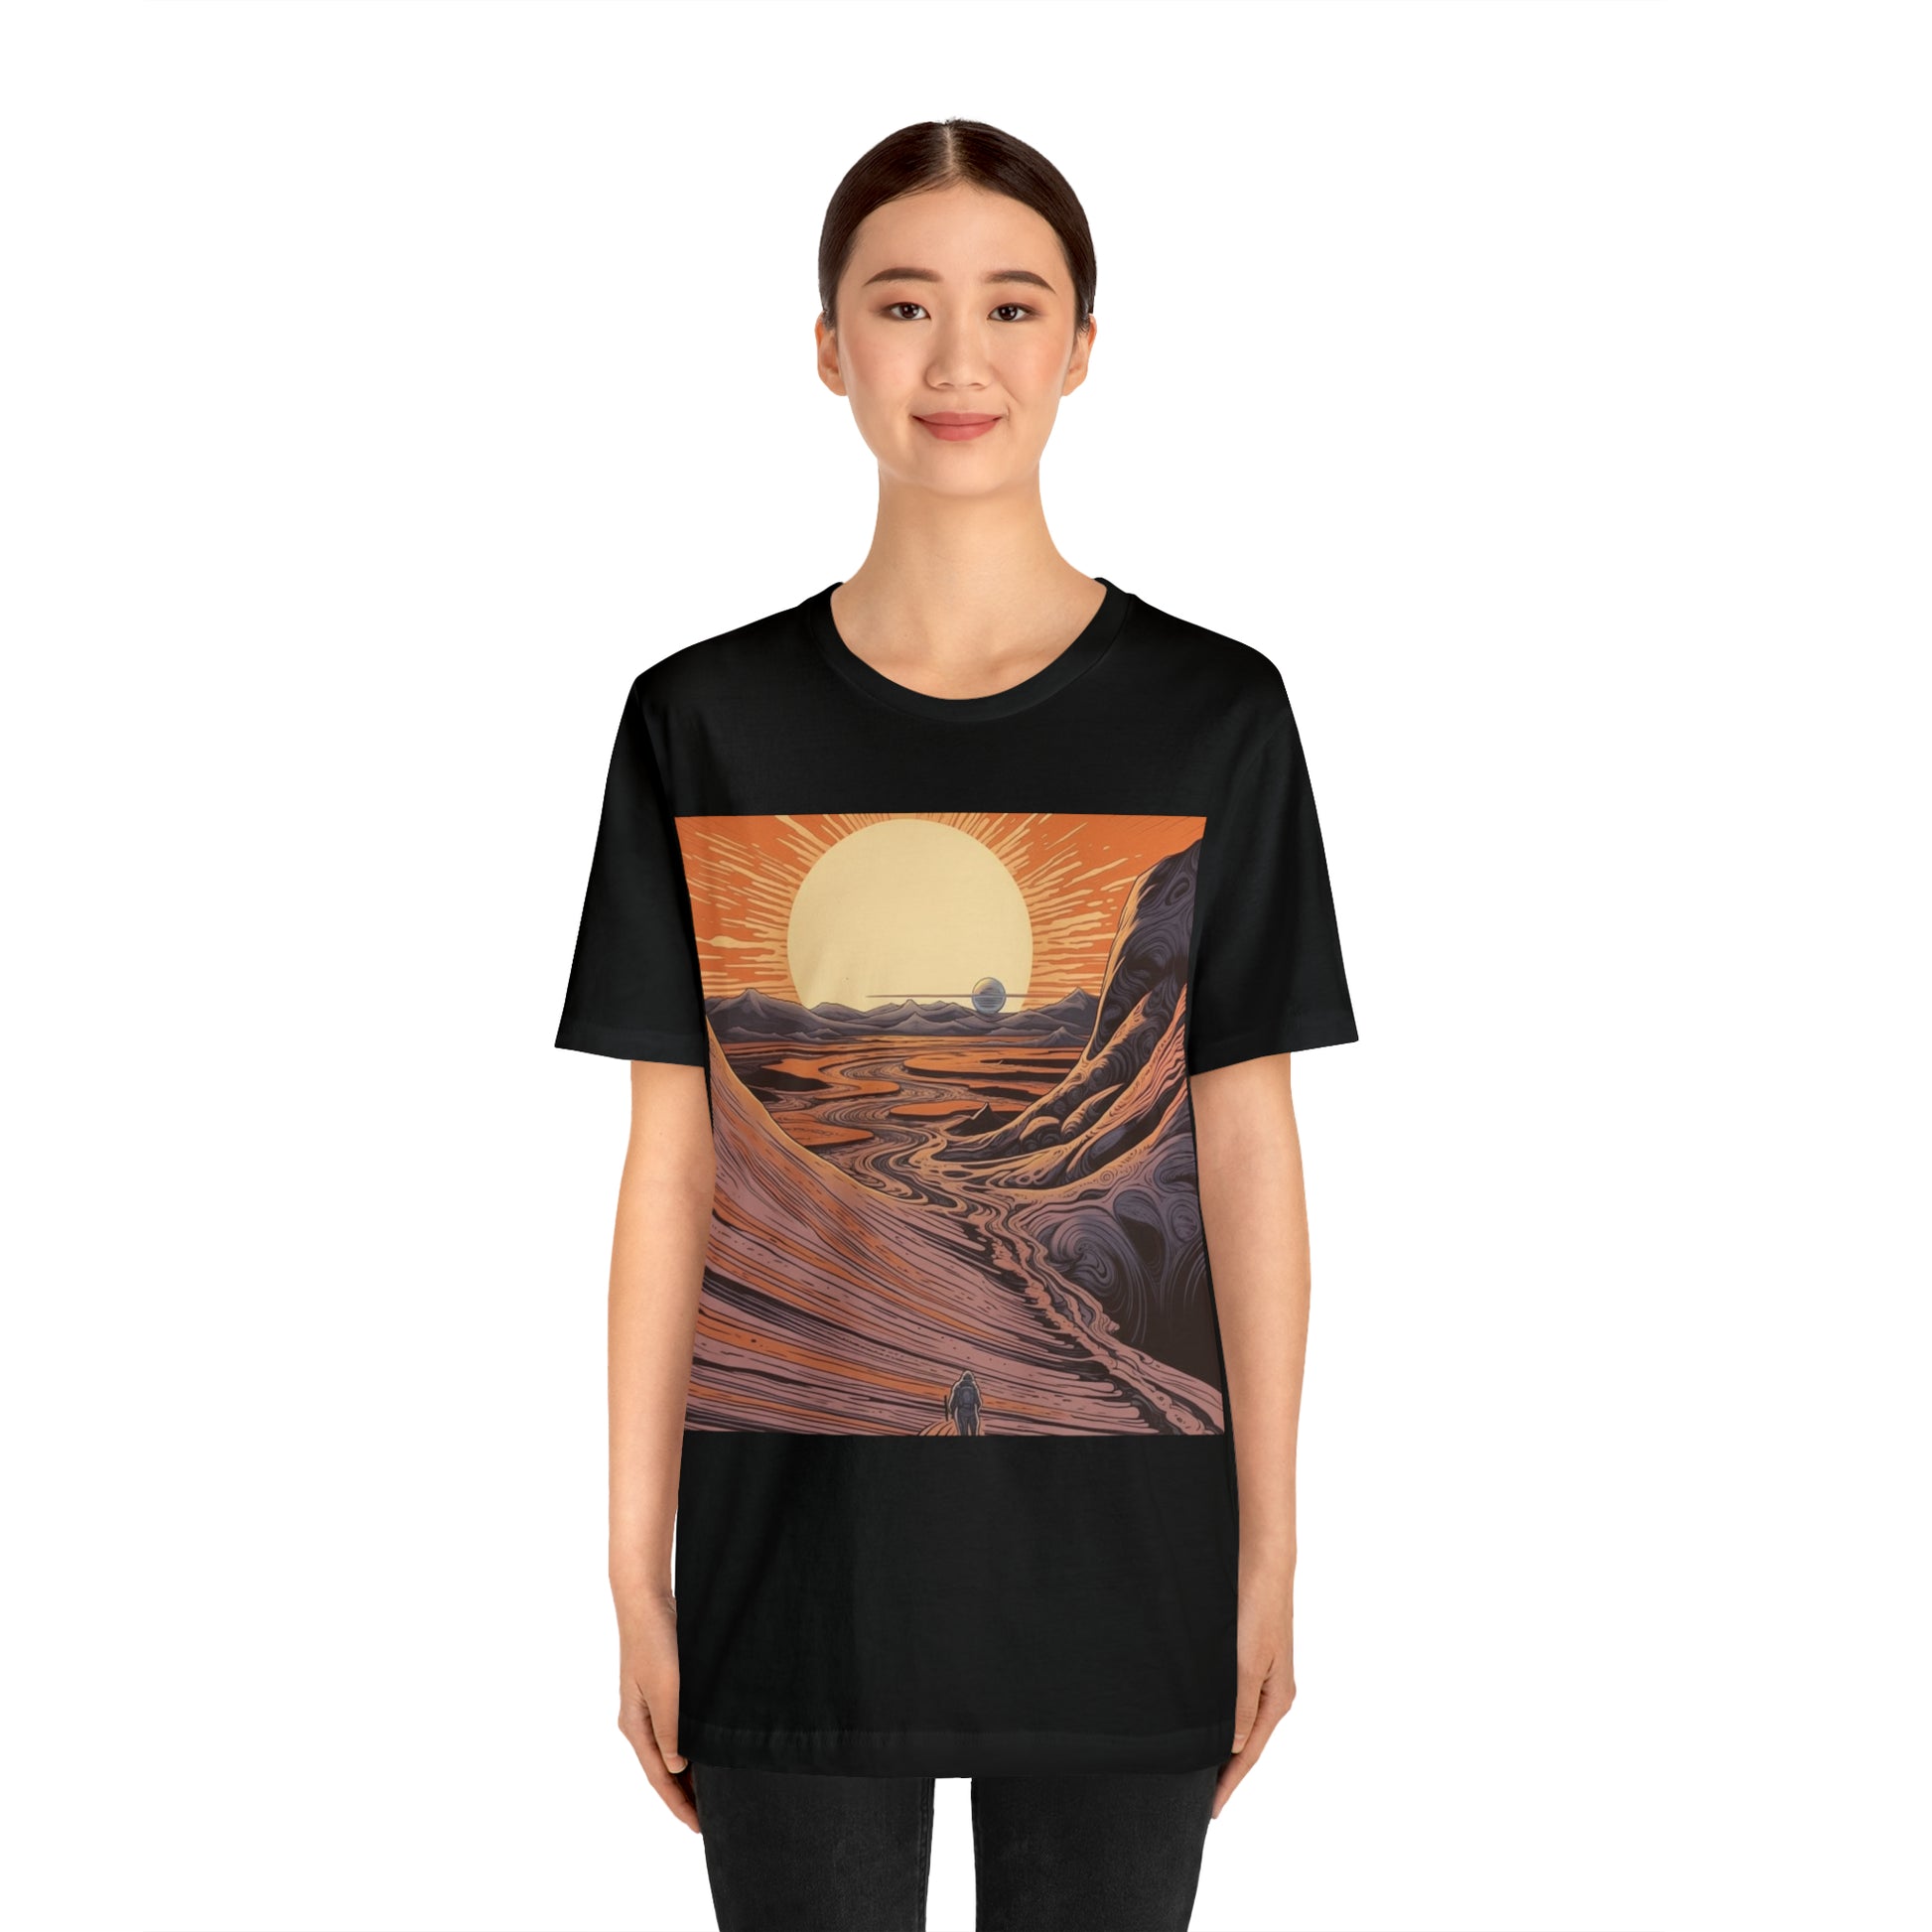 black-quest-thread-tee-shirt-with-large-sunrise-over-dunes-on-center-of-shirt